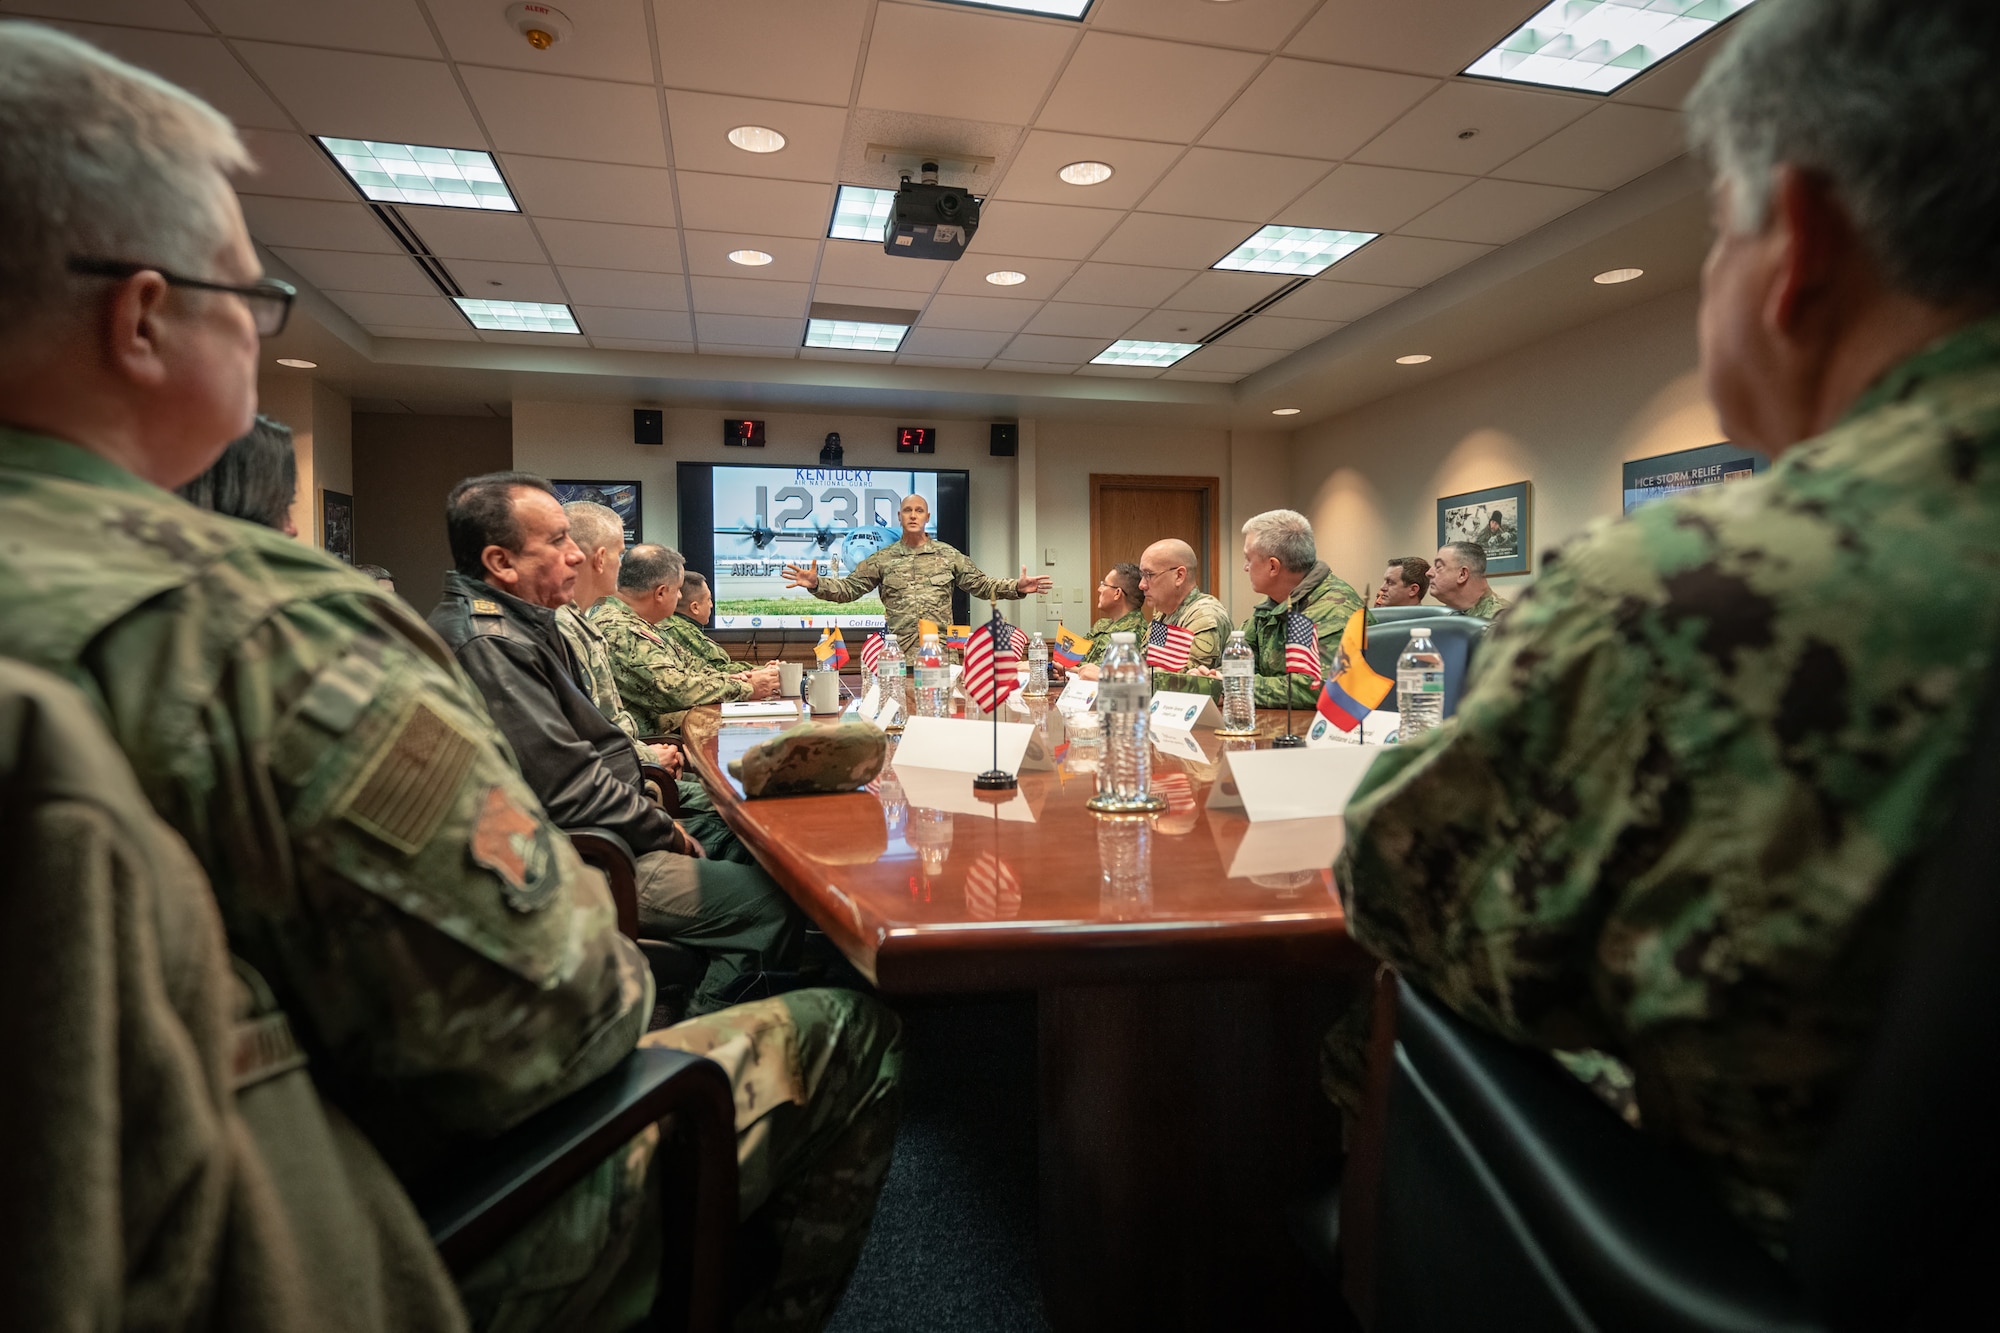 U.S. Air Force Col. George Imorde, deputy commander of the 123rd Airlift Wing, provides a mission brief to a group of Ecuadorian military leaders at the Kentucky Air National Guard Base in Louisville, Ky., Jan. 31, 2024. The Ecuadorians are visiting this week to exchange information with the Kentucky National Guard as part of the State Partnership Program, a National Guard Bureau effort that pairs Guard units with foreign allies to foster enhanced understanding across all aspects of civil and military affairs. (U.S. Air National Guard photo by Dale Greer) by Dale Greer)